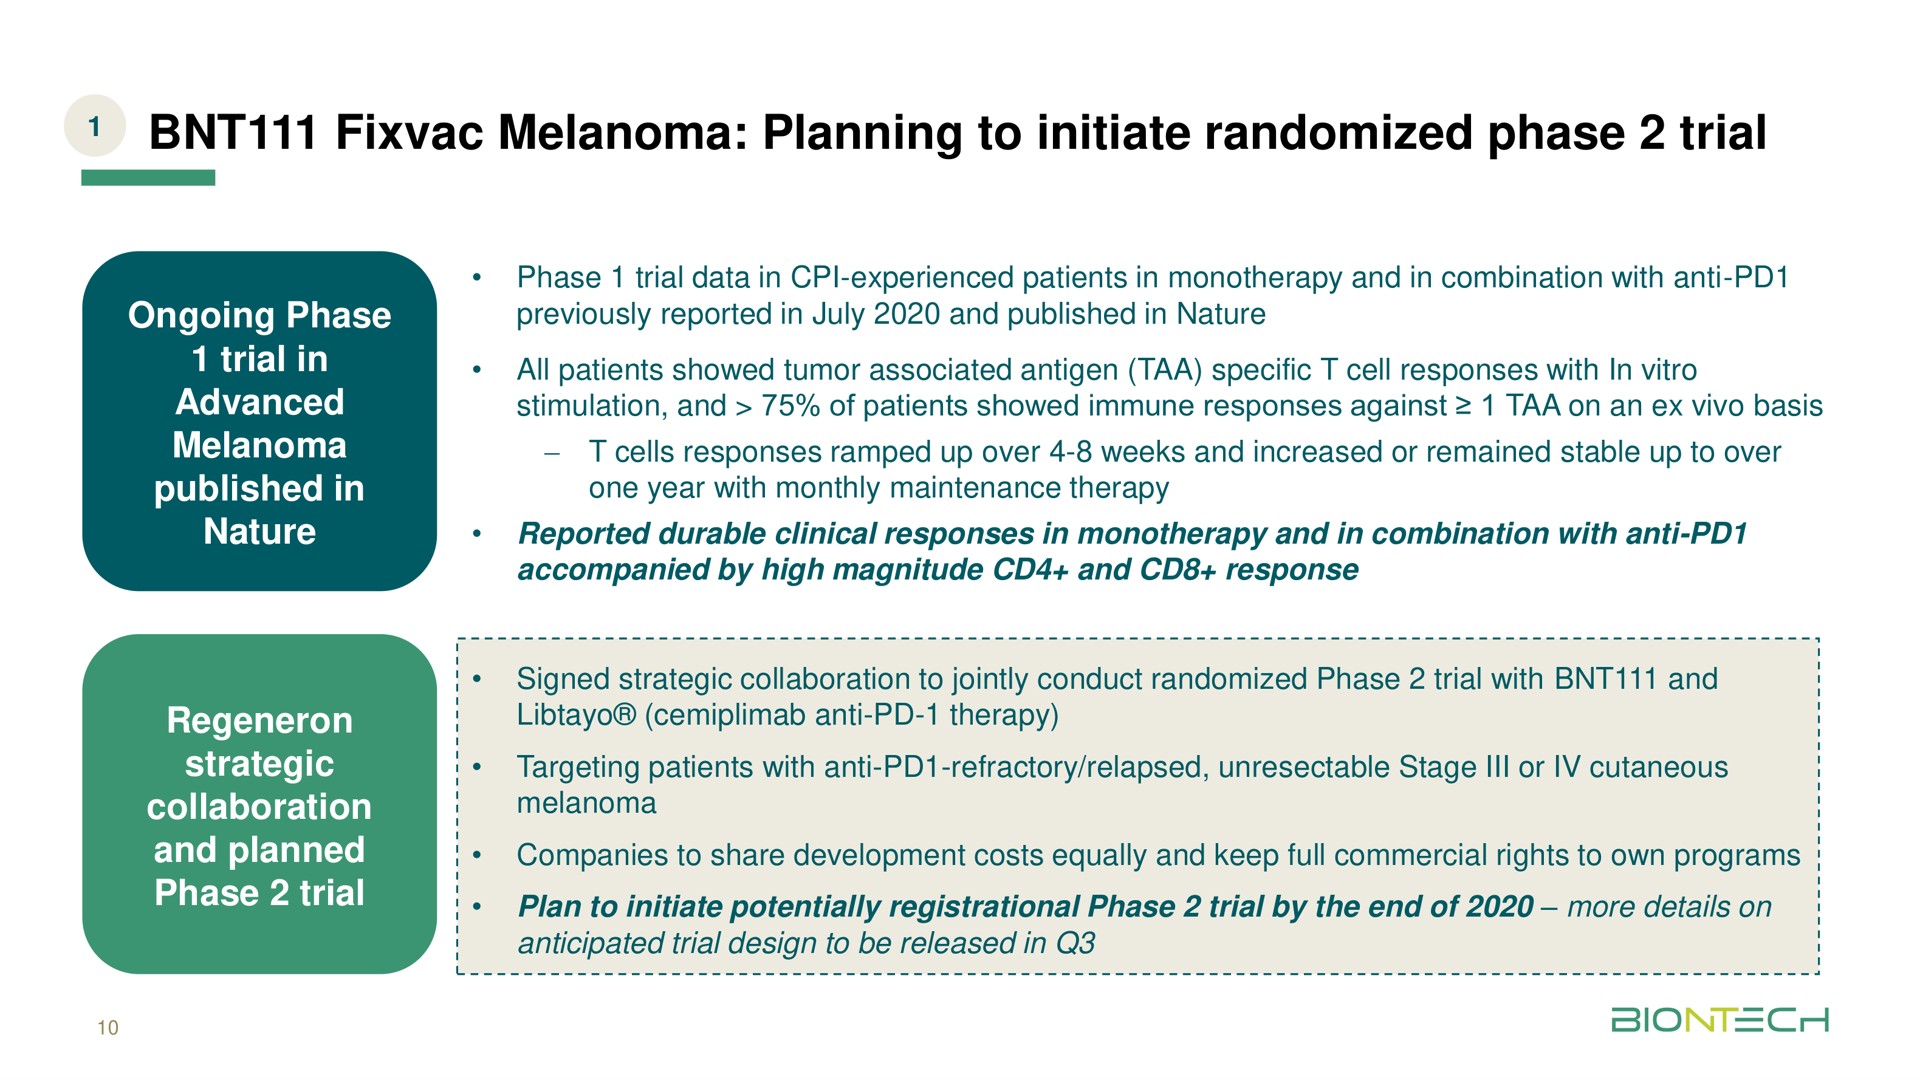 melanoma planning to initiate randomized phase trial | BioNTech